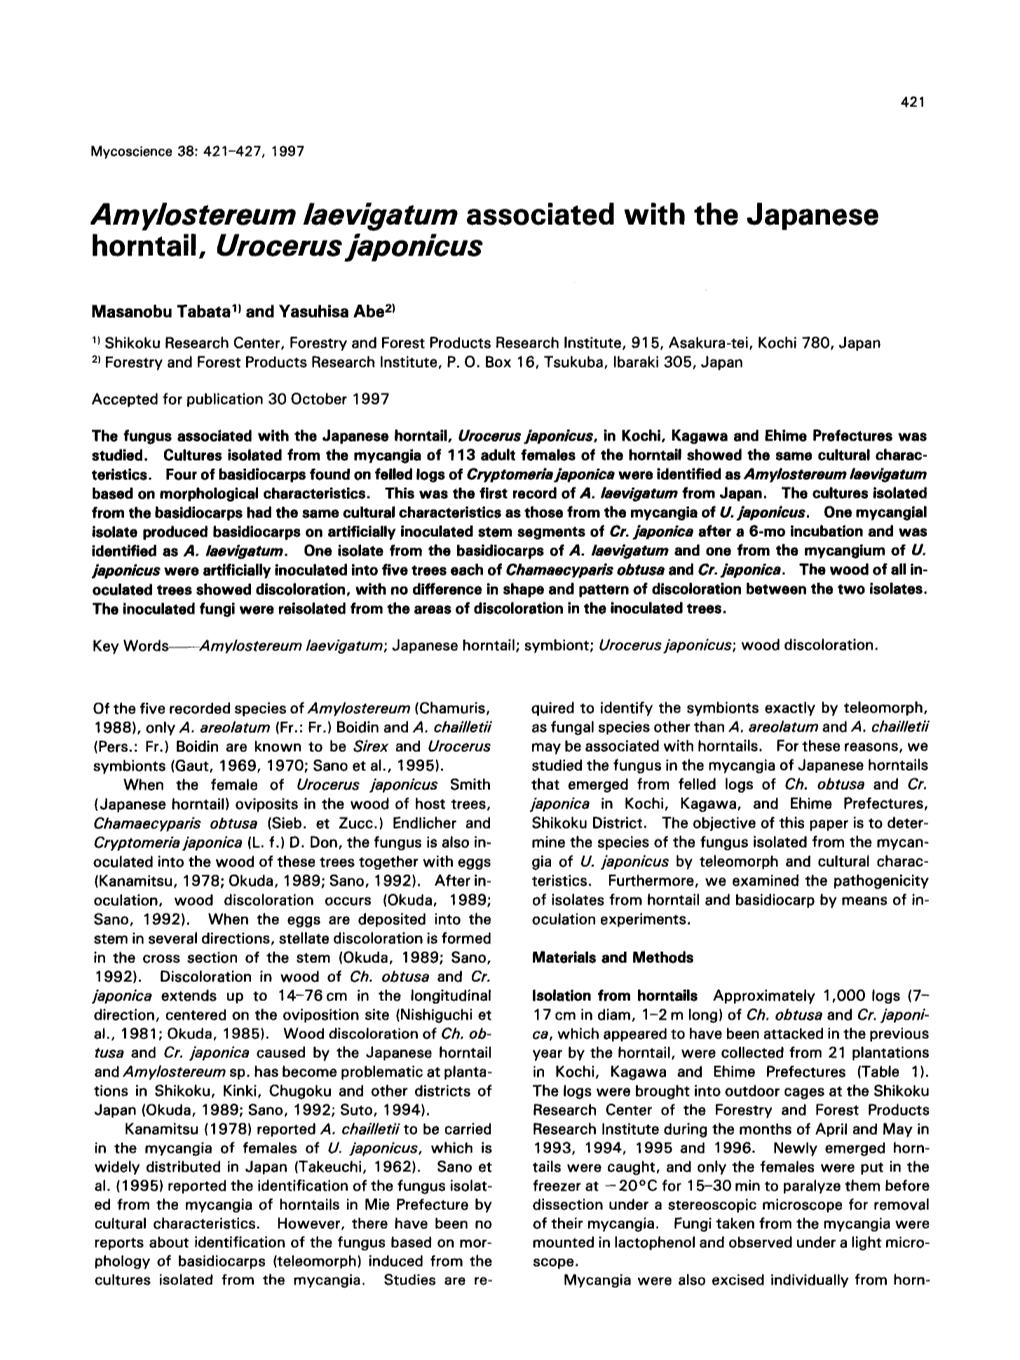 Amylostereum Laevigatum Associated with the Japanese Horntail, Urocerusjaponicus